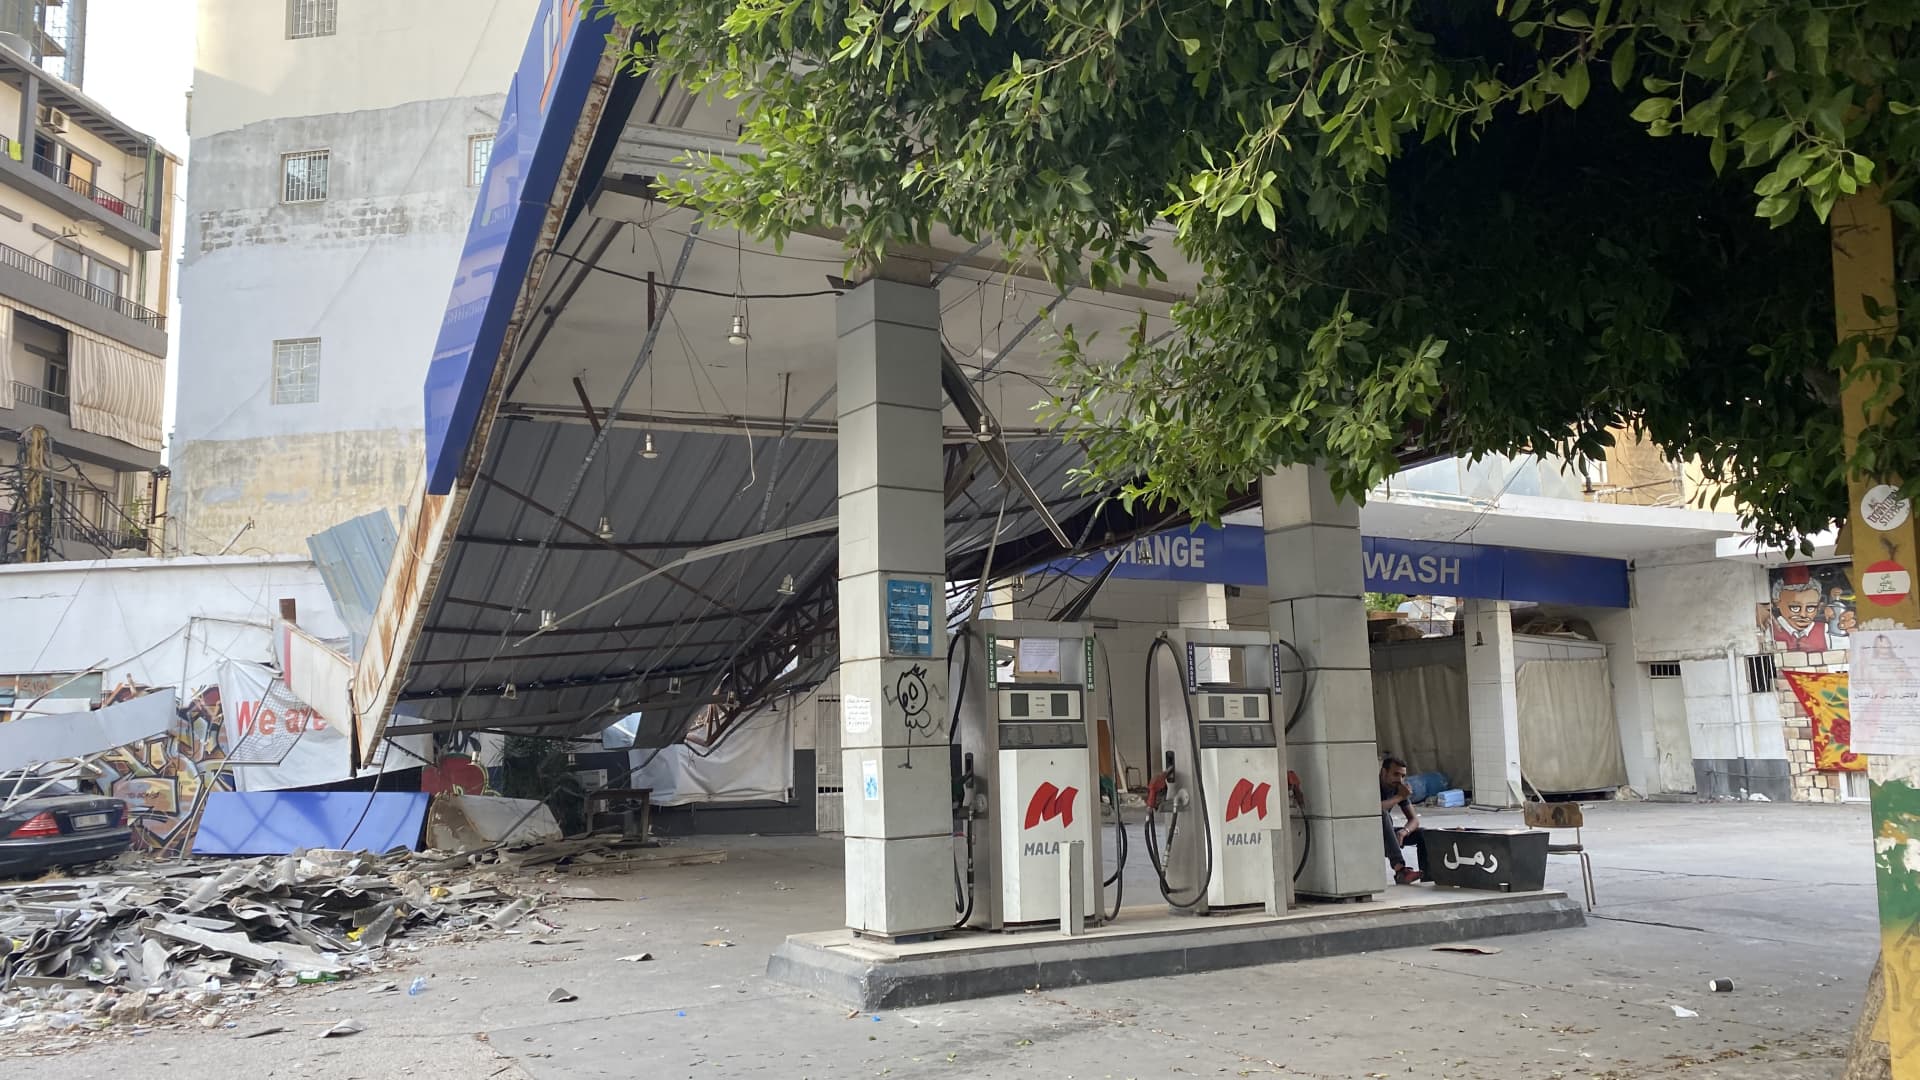 A gas station destroyed in the Beirut port explosion of August 2020 remains unrepaired in the city's Mar Mikhael district, more than a year after the blast. Beirut, Lebanon, September 25, 2021.